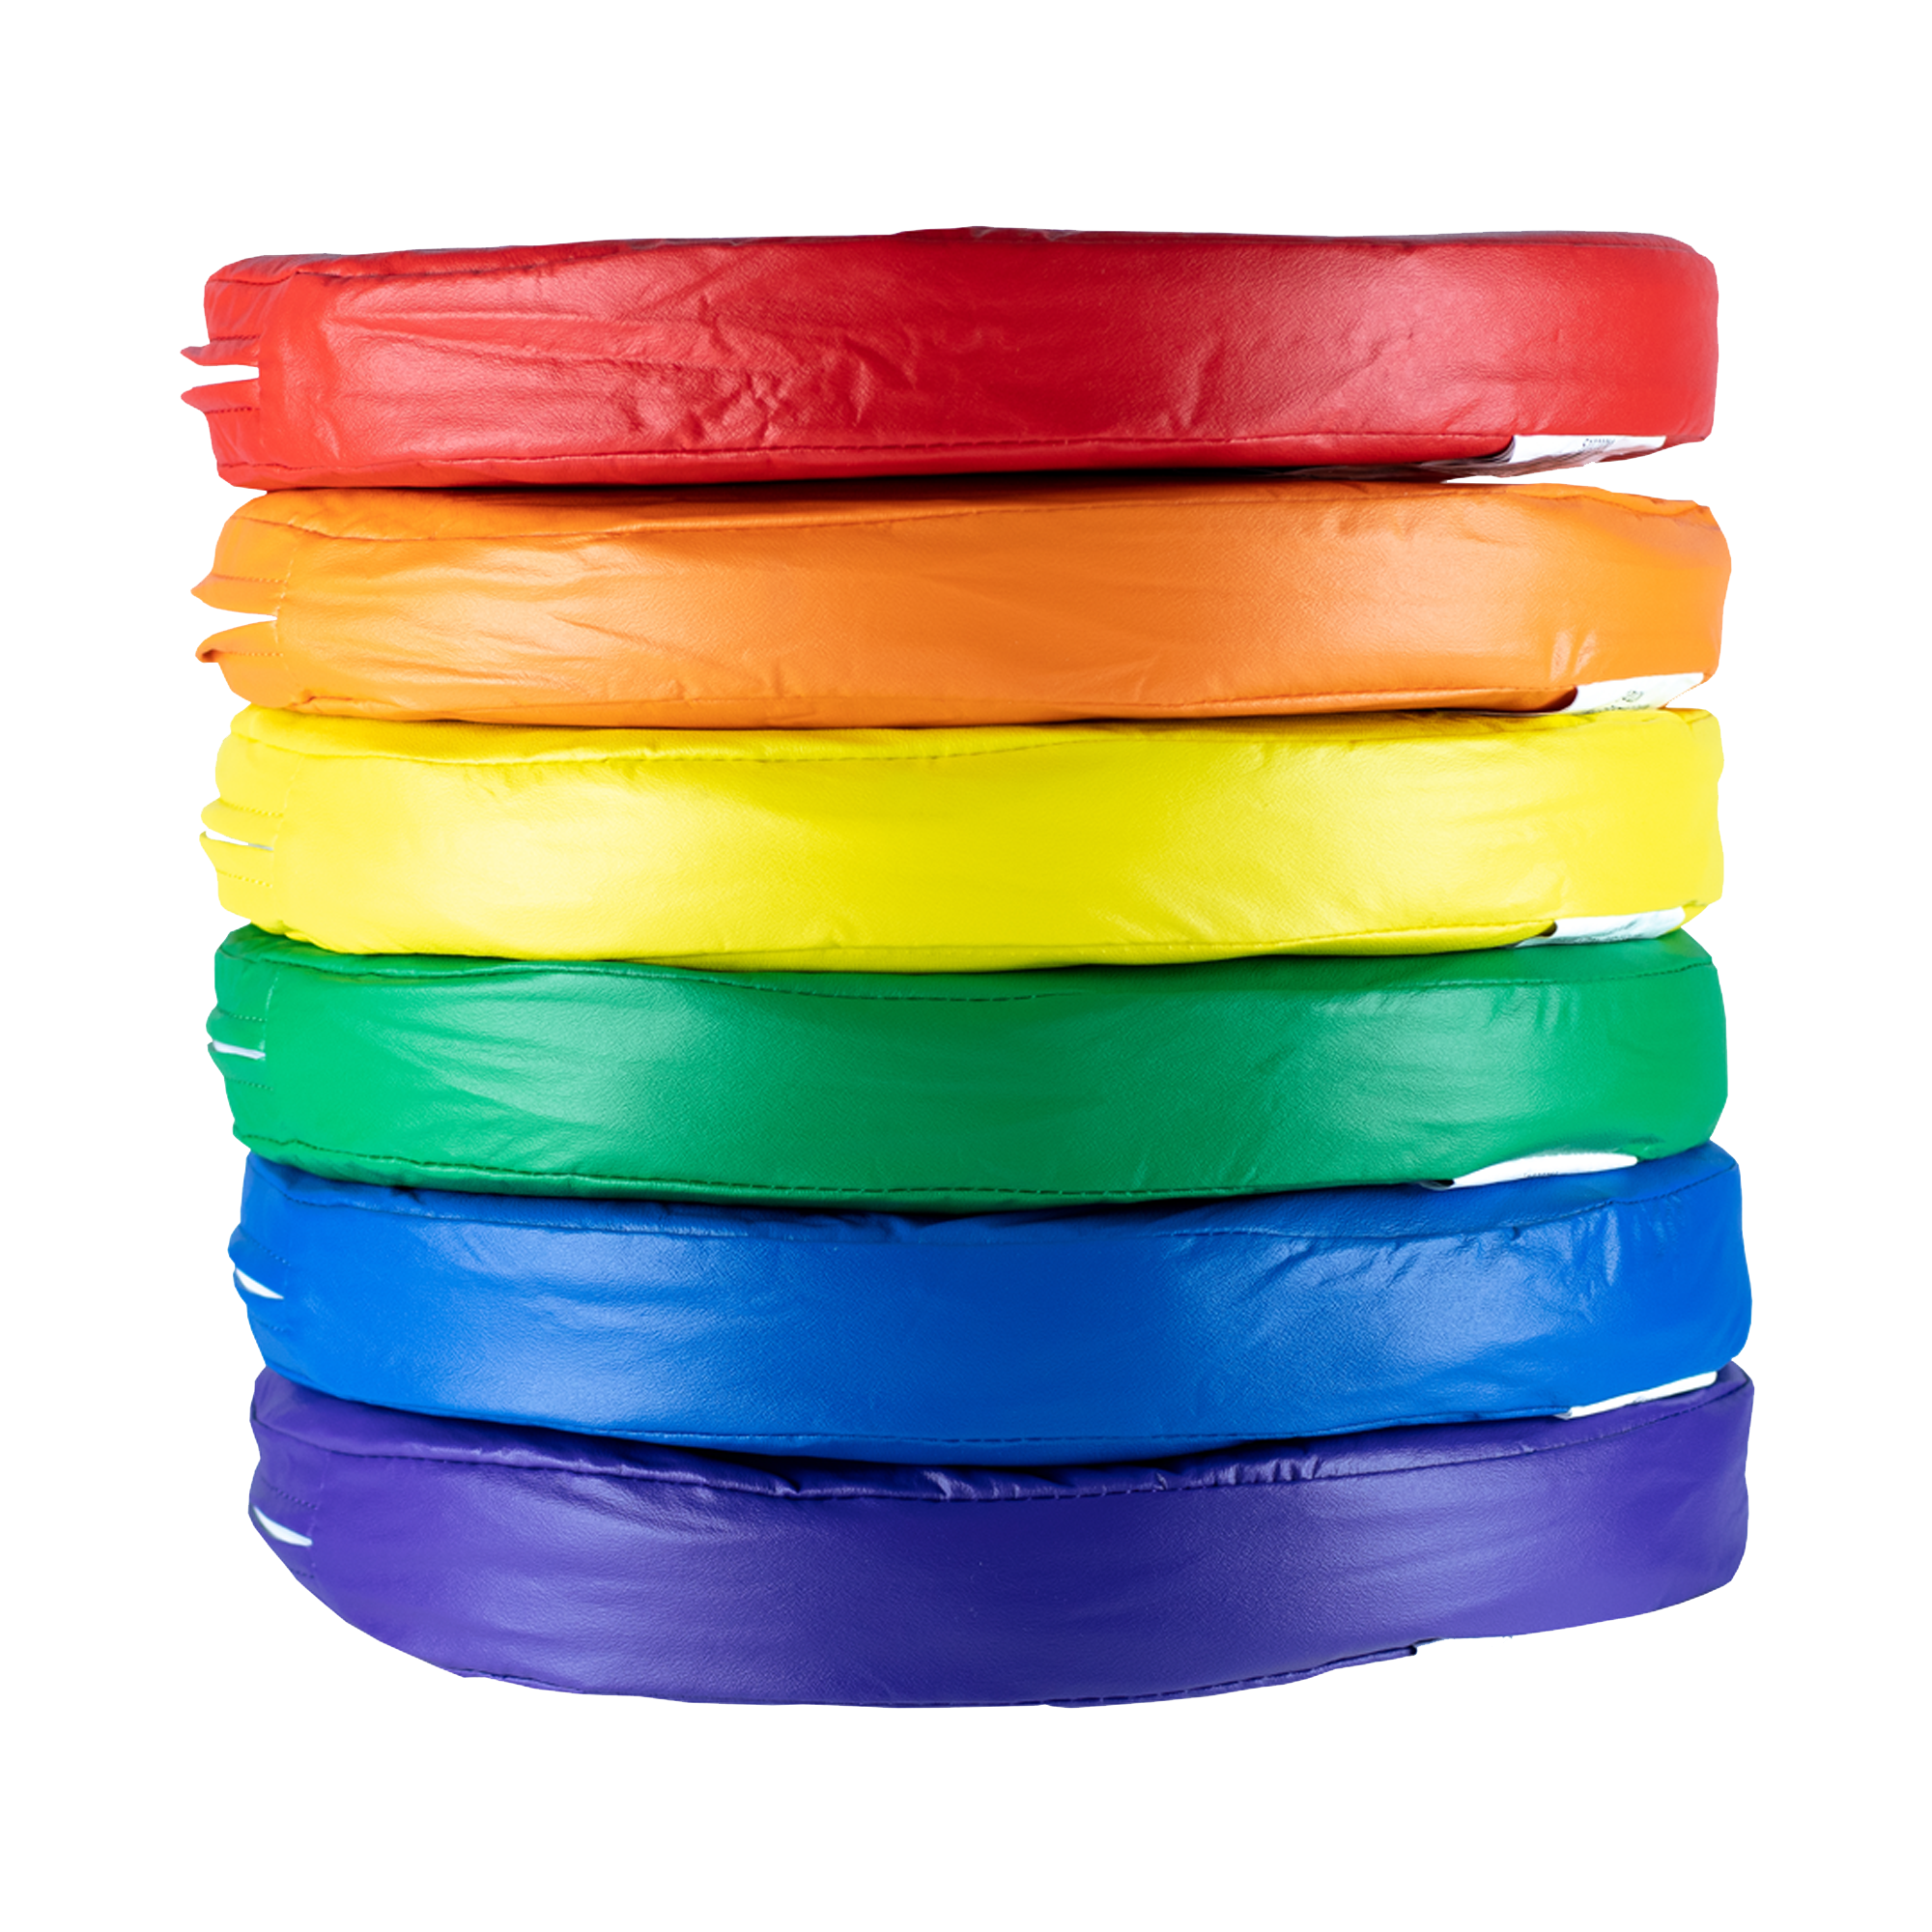 6 PACK OF ROUND KINDERCUSHIONS